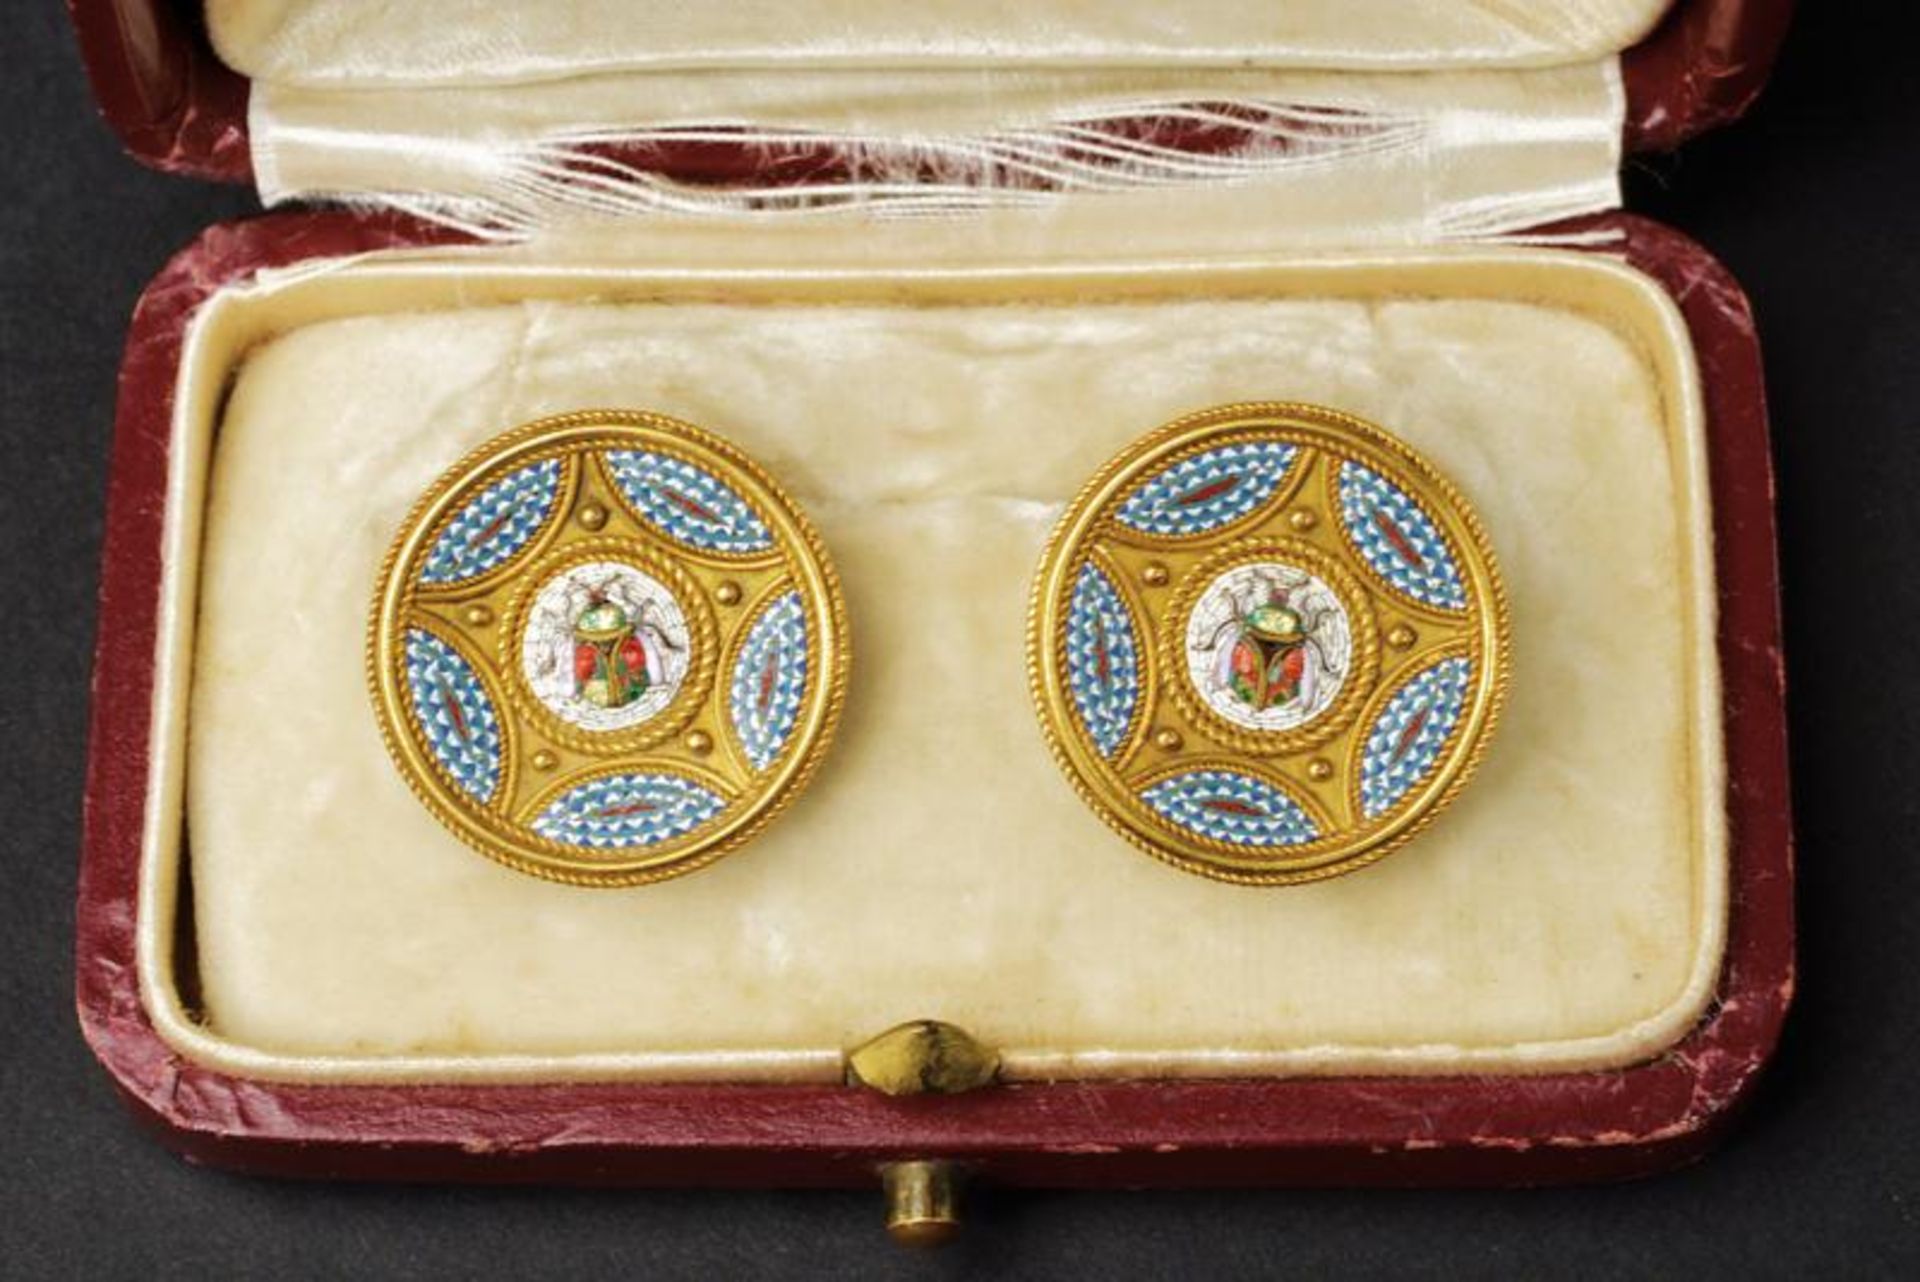 Rare 18 kt gold mounted shirt cufflinks with micromosaics. Italy, late 19th Century - Image 2 of 2